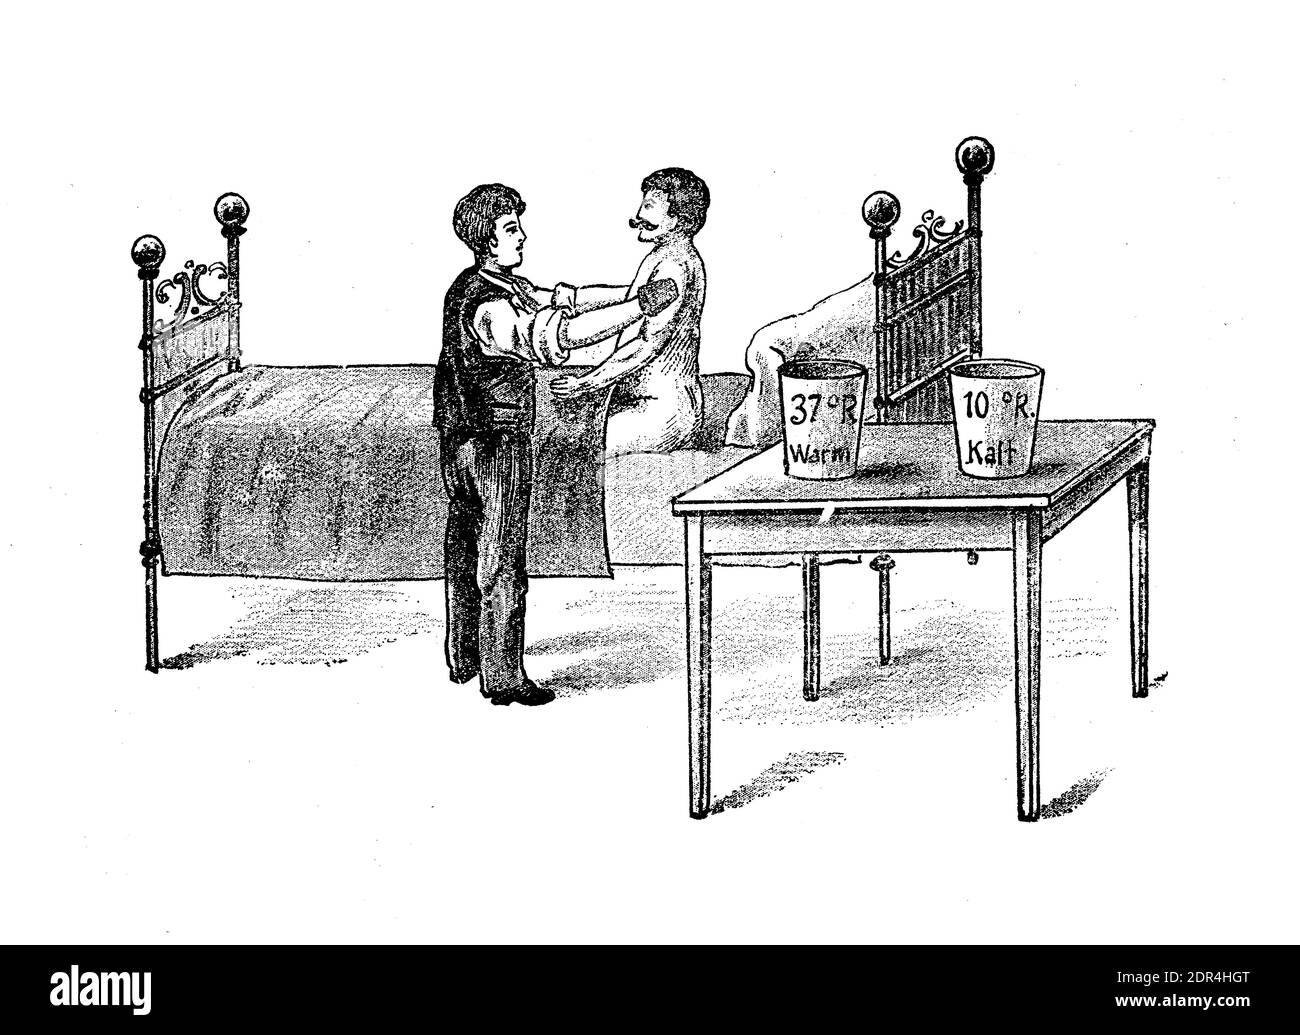 Contrast  therapy: man taking a brisk rubbing  treatment  of the body  alternating hot and cold water several times, 19th century illustration Stock Photo